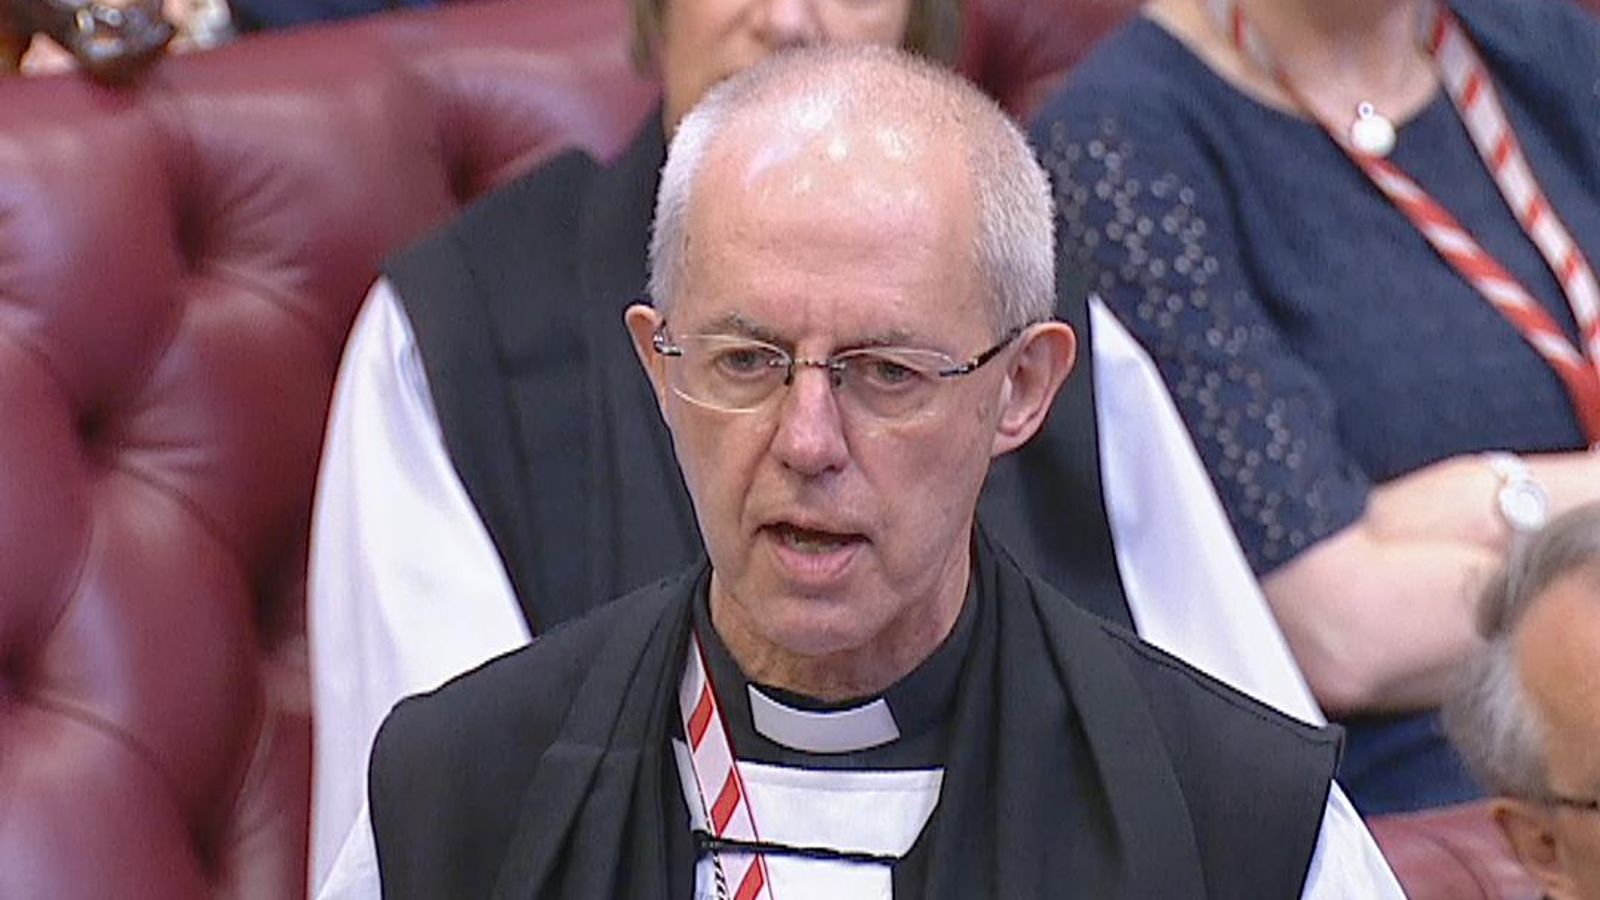 Illegal Migration Bill has 'too many problems for one speech' - Archbishop of Canterbury